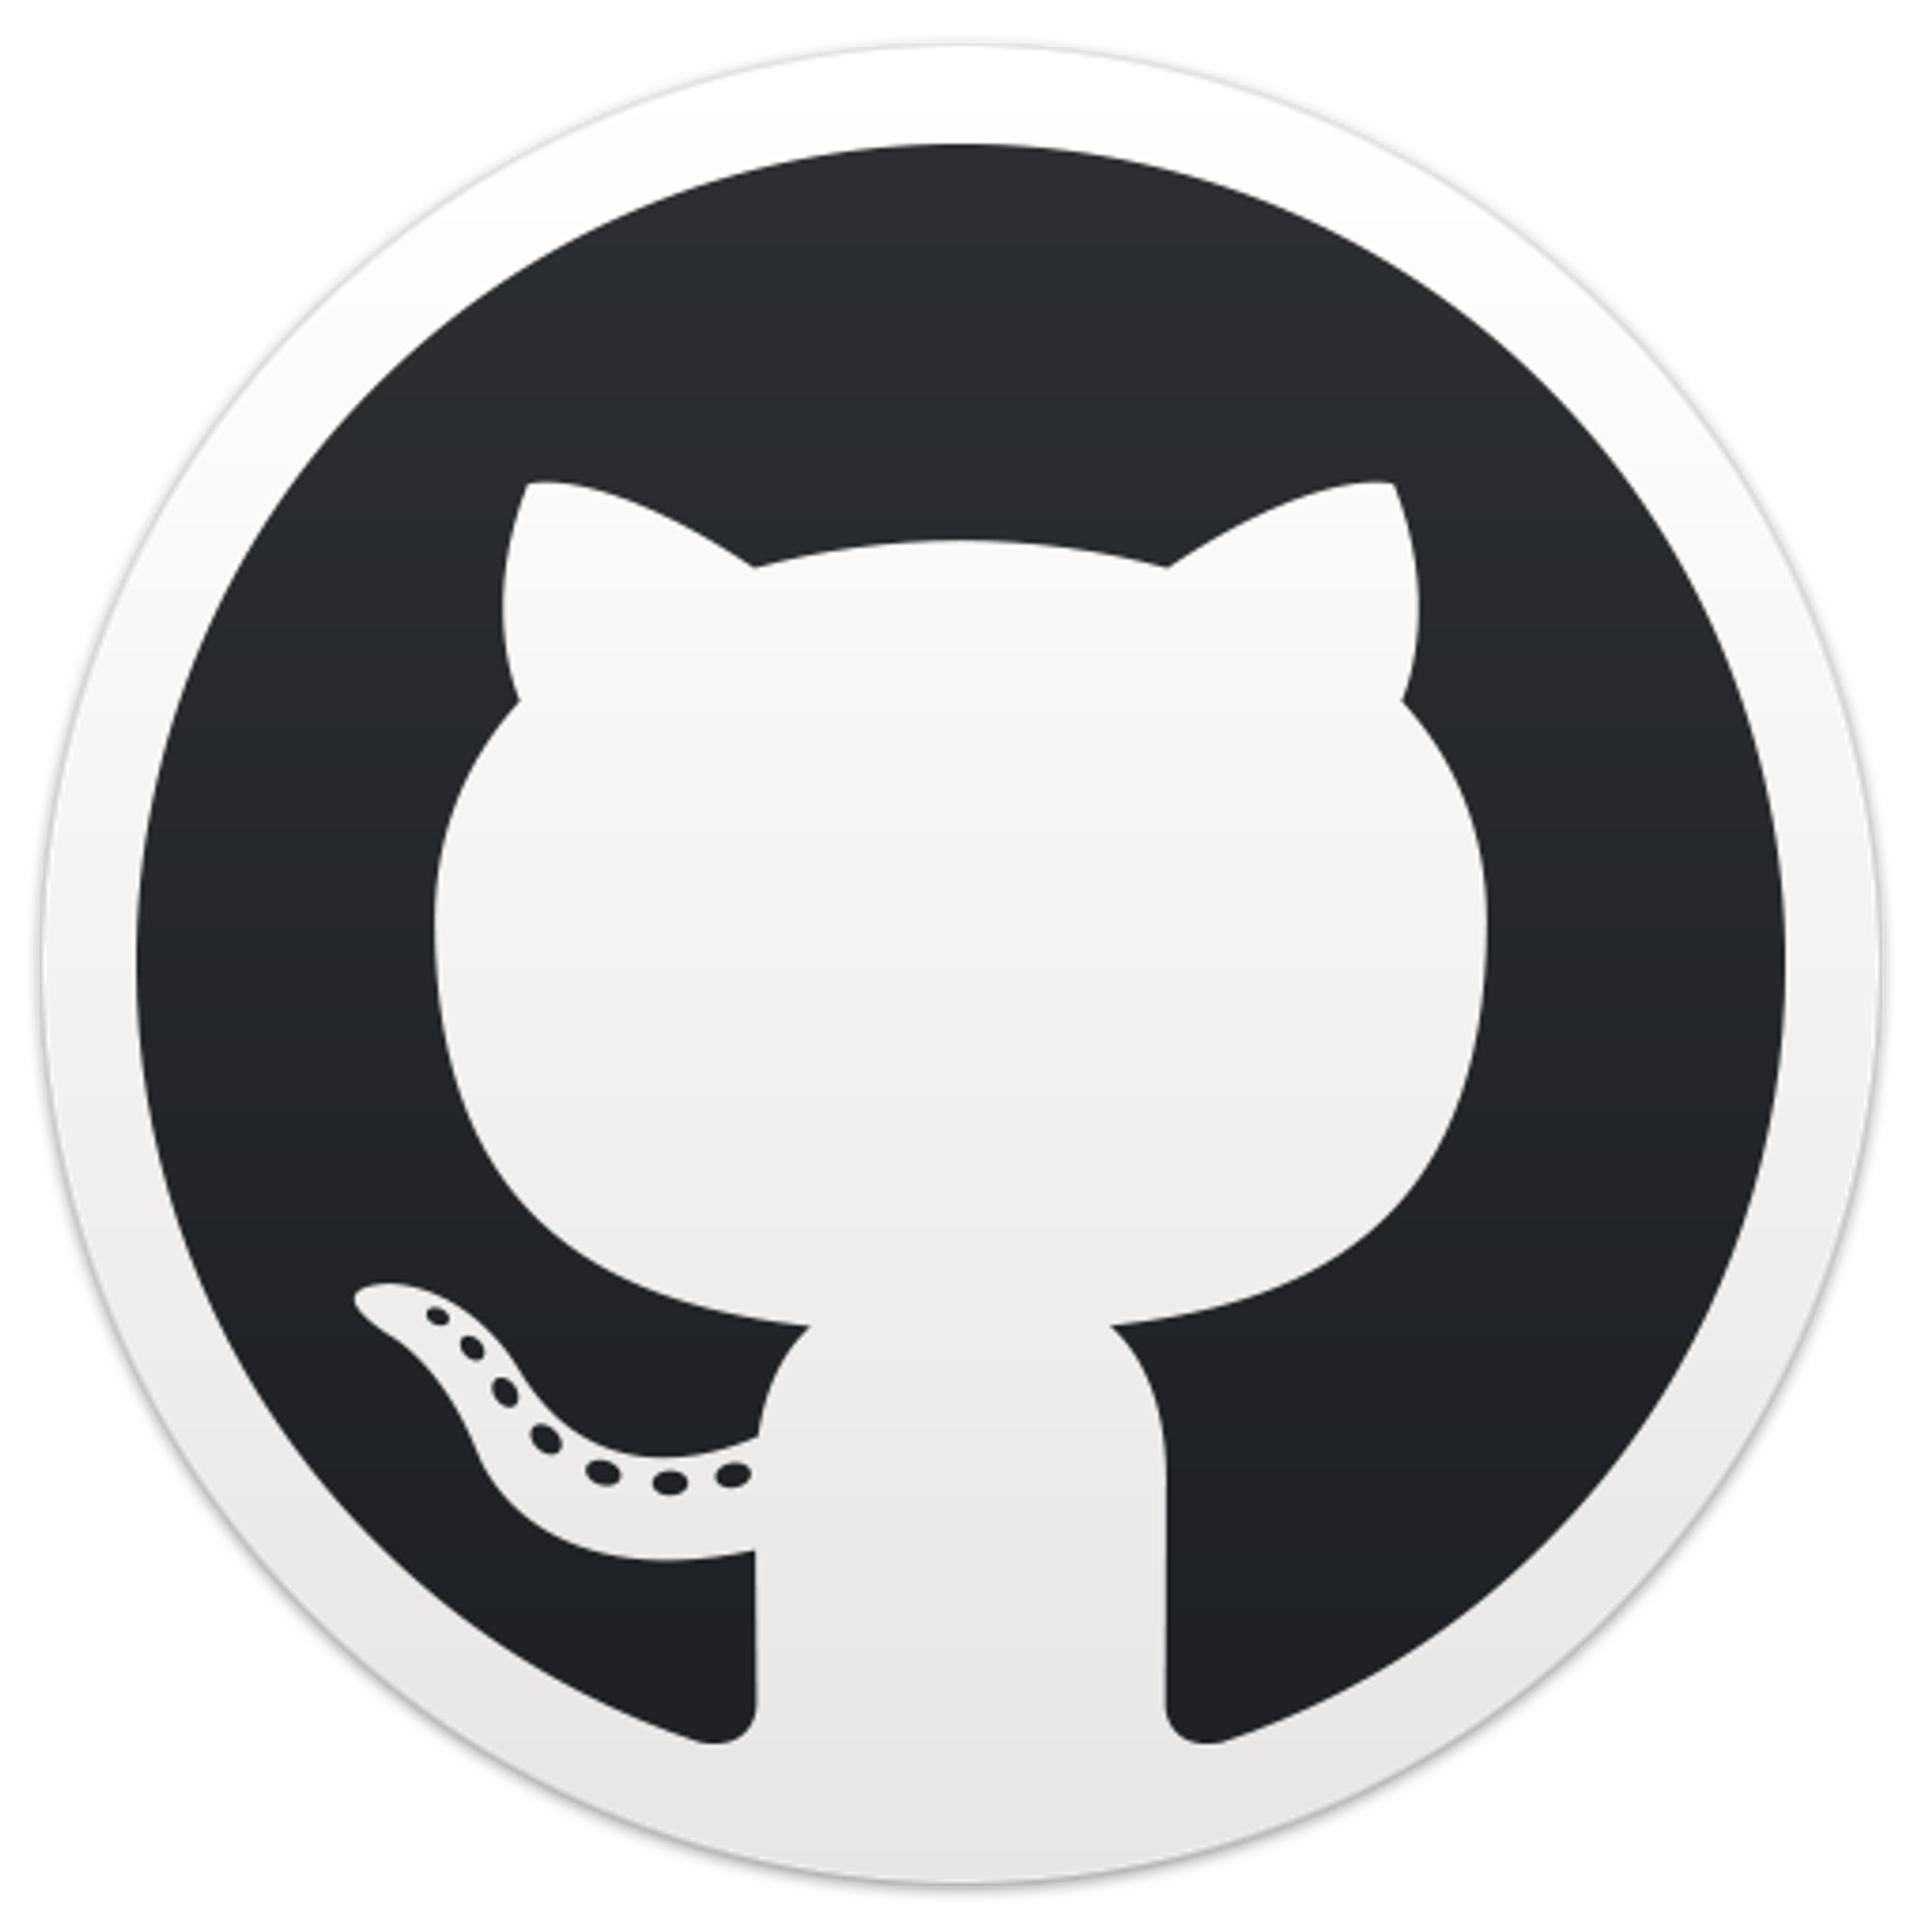 GitHub - iamadamdev/bypass-paywalls-chrome: Bypass Paywalls web browser extension for Chrome and Firefox.